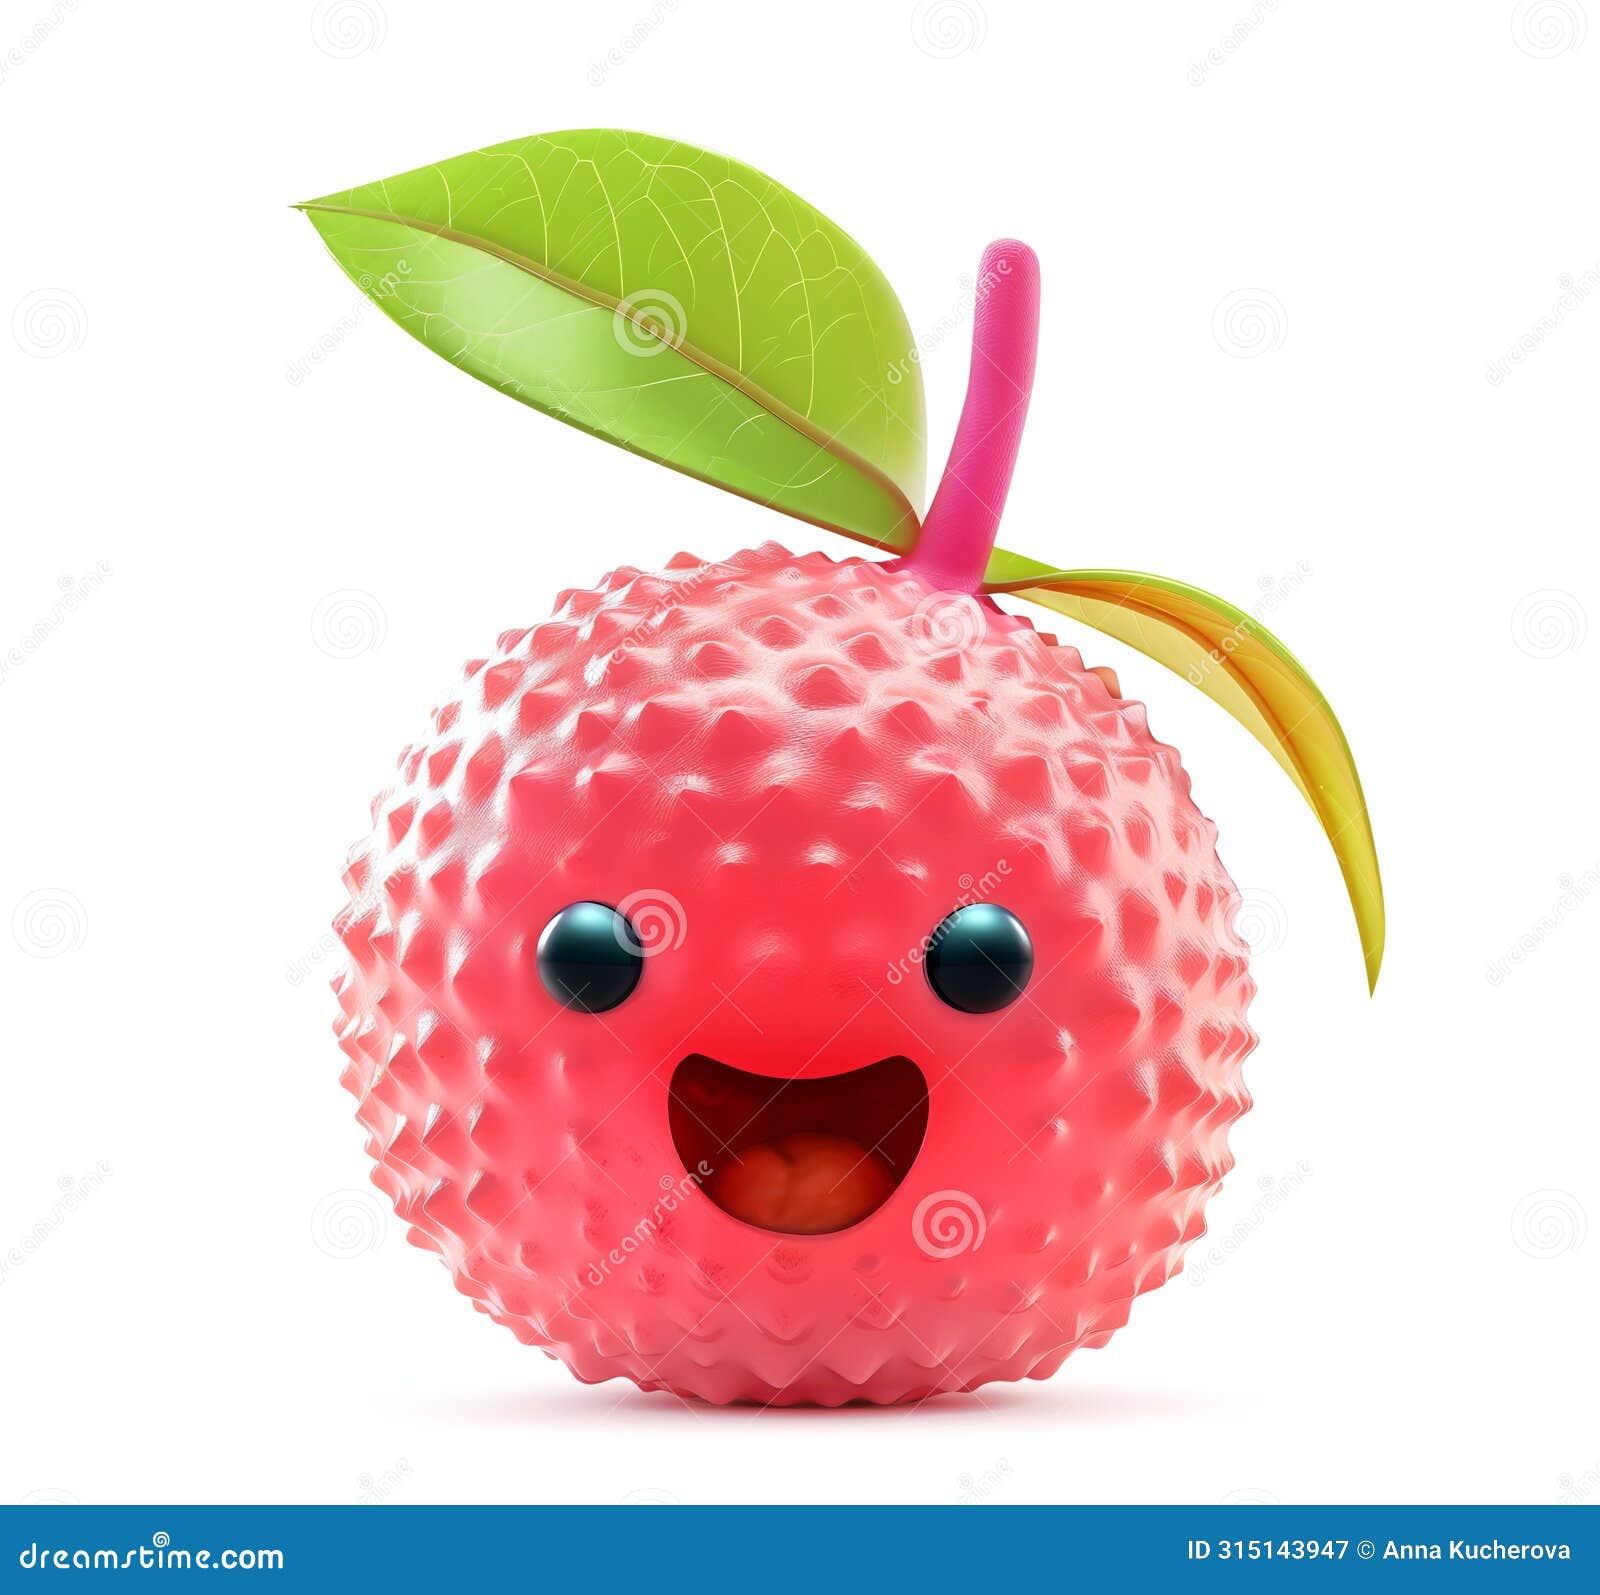 lychee character with a joyful expression and a green leaf